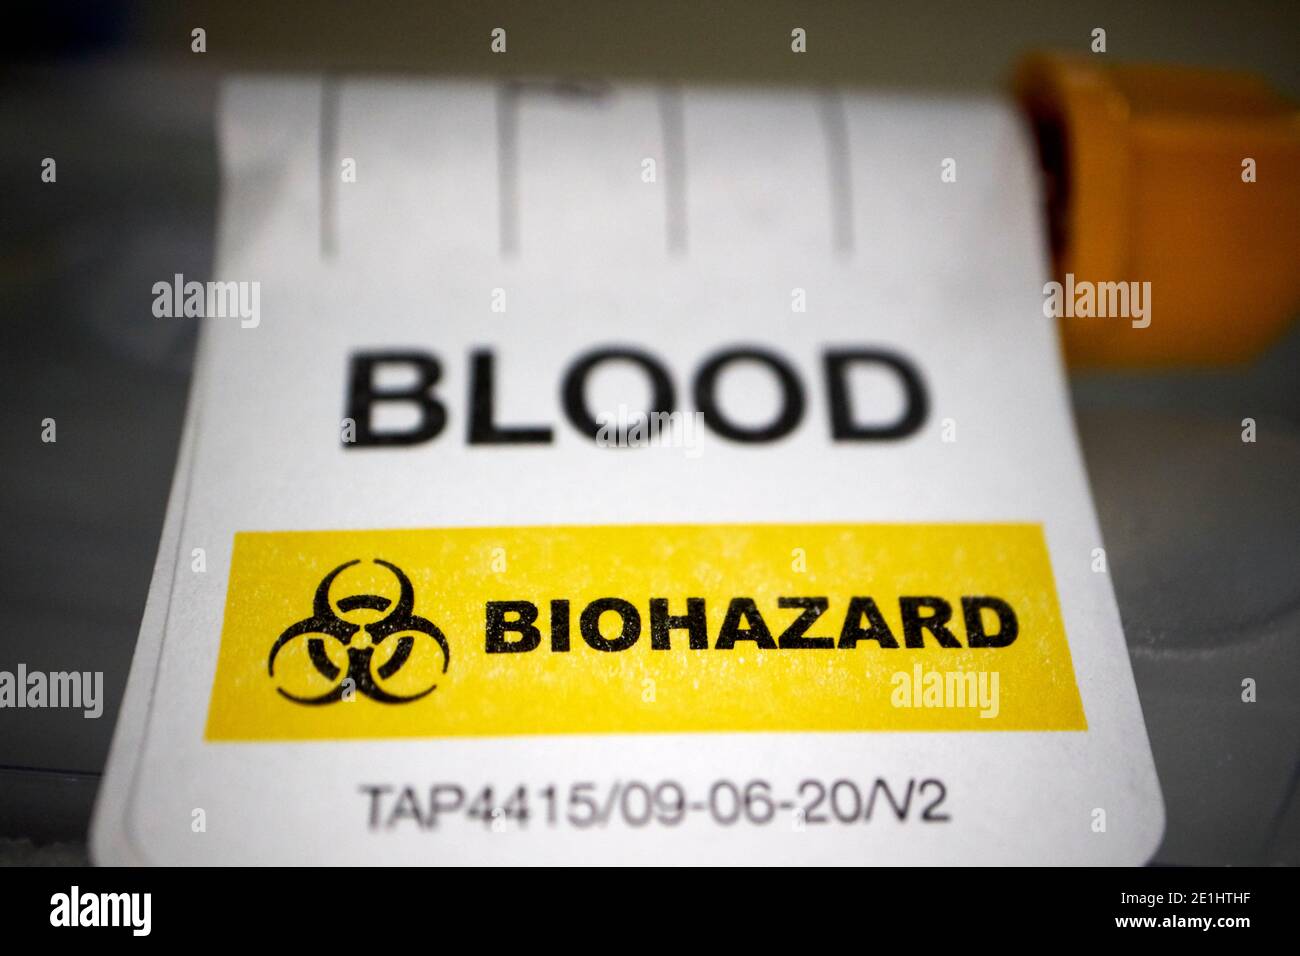 blood sample labelled blood and biohazard for commercial covid-19 antibody blood test kit for home testing for coronavirus antibodies received in the uk Stock Photo